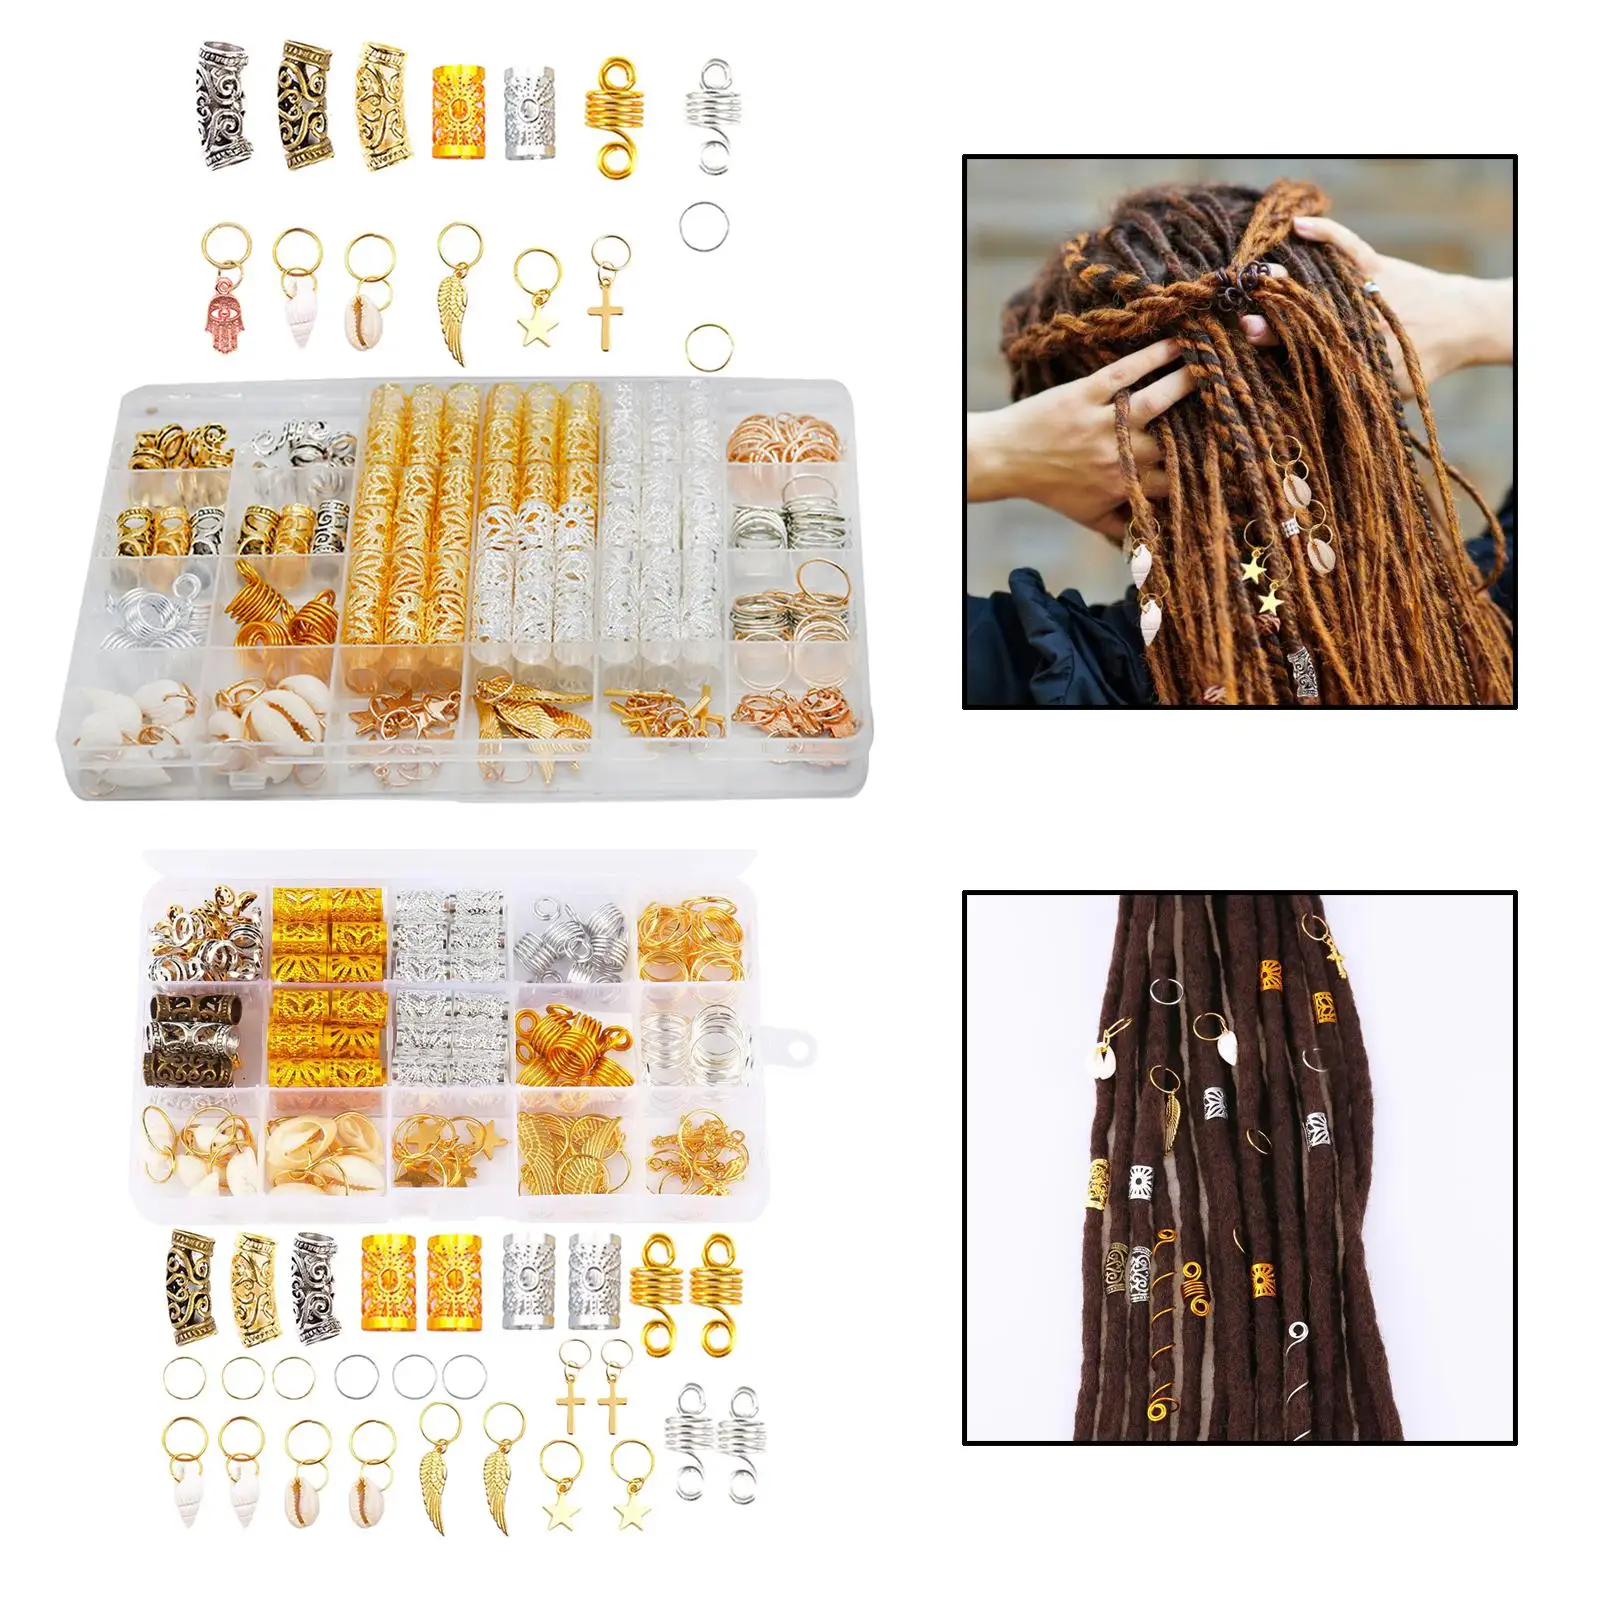 Alloy Hair Extension Clips Kit Shell Cylinder Decoration Crafts Kit Hair Tie Clips for Dreadlock Make up Salon Women Kids Adult